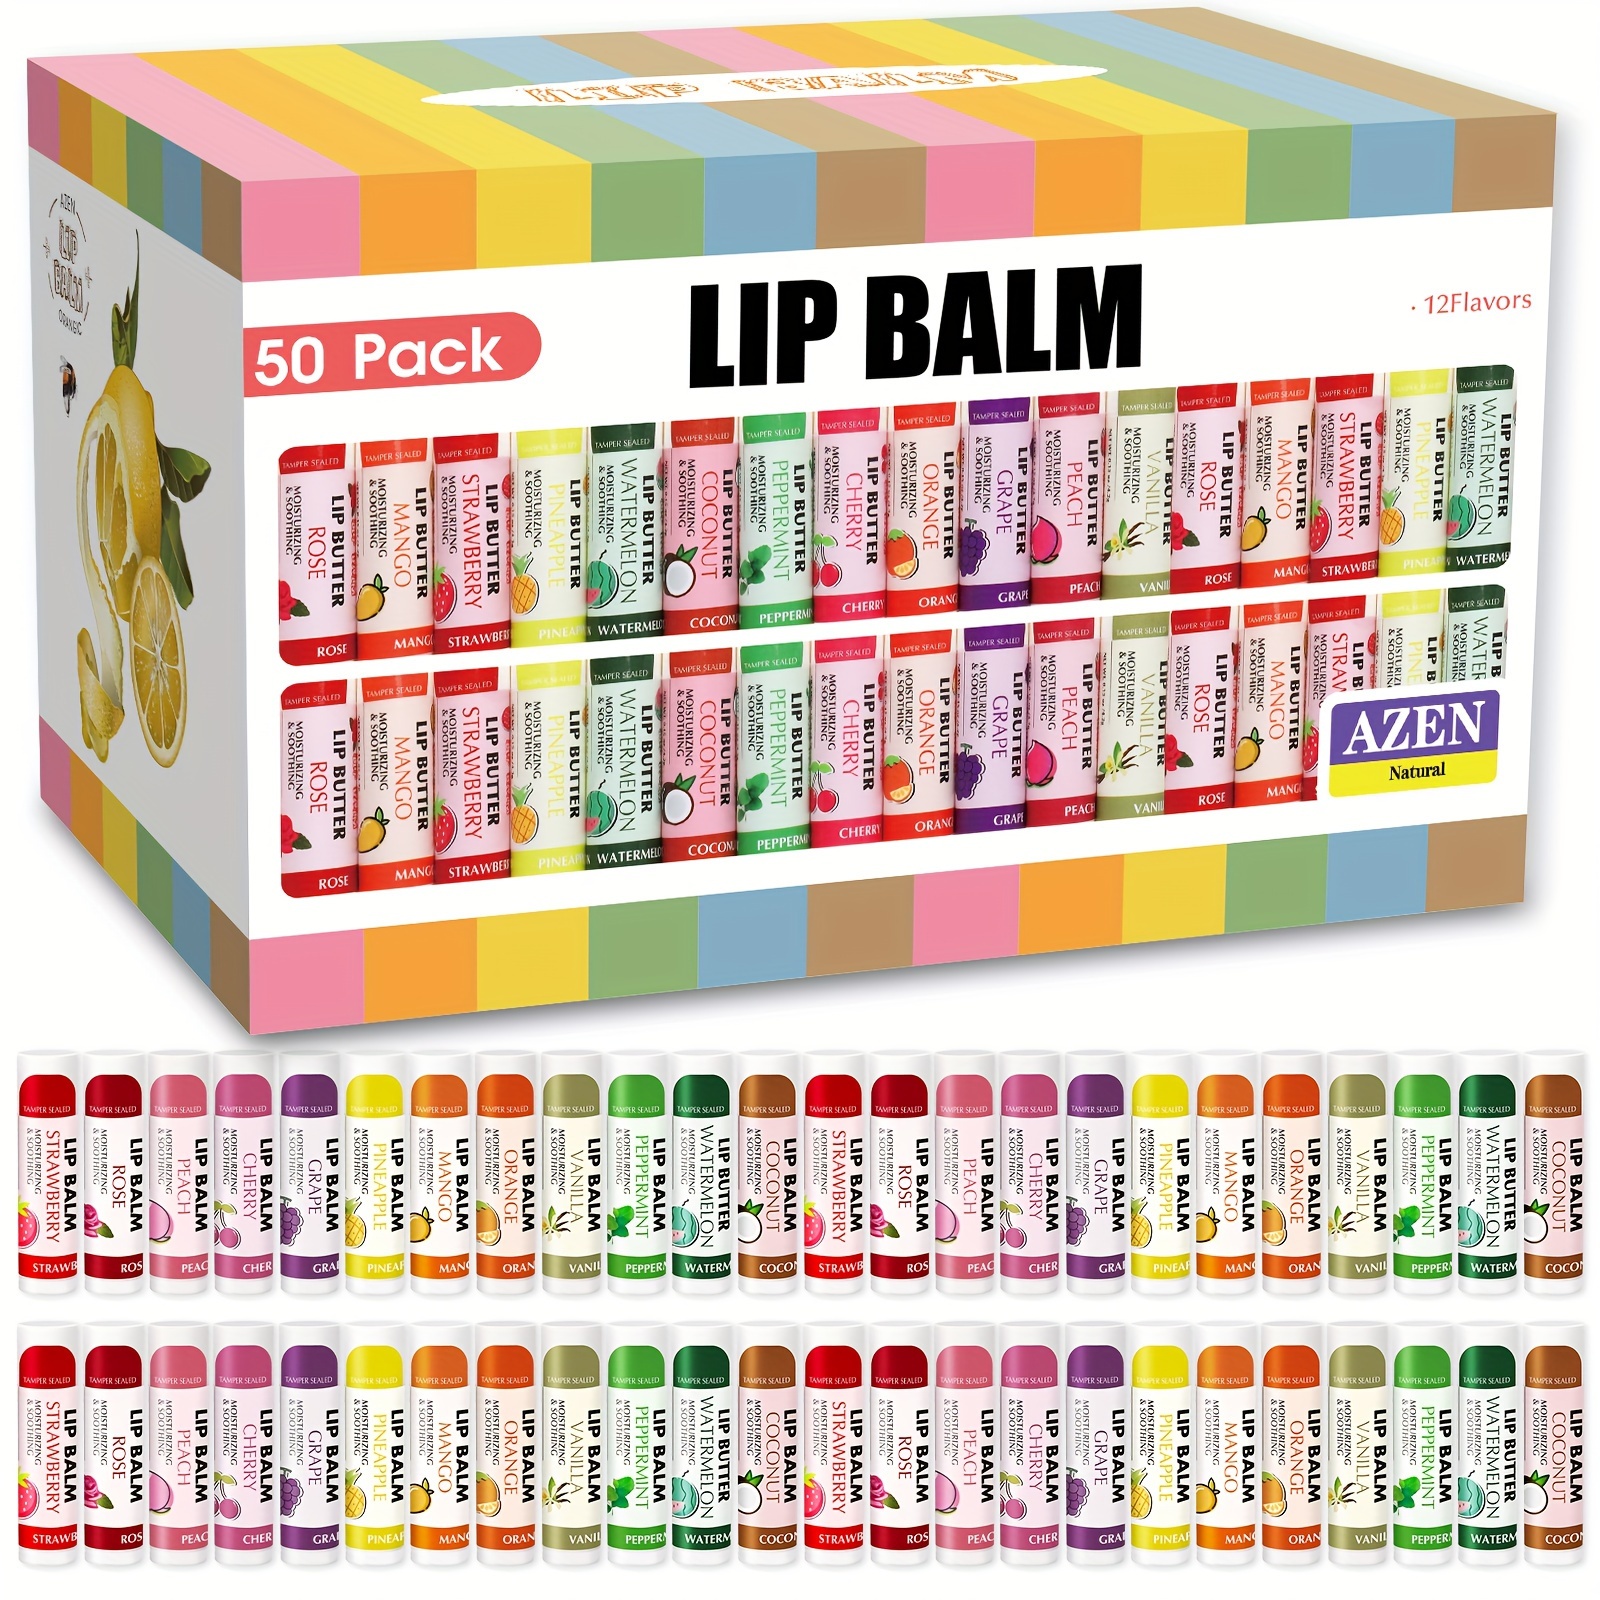 

50 Pack/box, Lip Balm Set, Lip Moisturizer, Lipstick Gift Set, Moisturizing And Nourishing Dry Lips, Gifts For Women, Mother Gifts, Party Supplies Gift, Souvenir Gifts